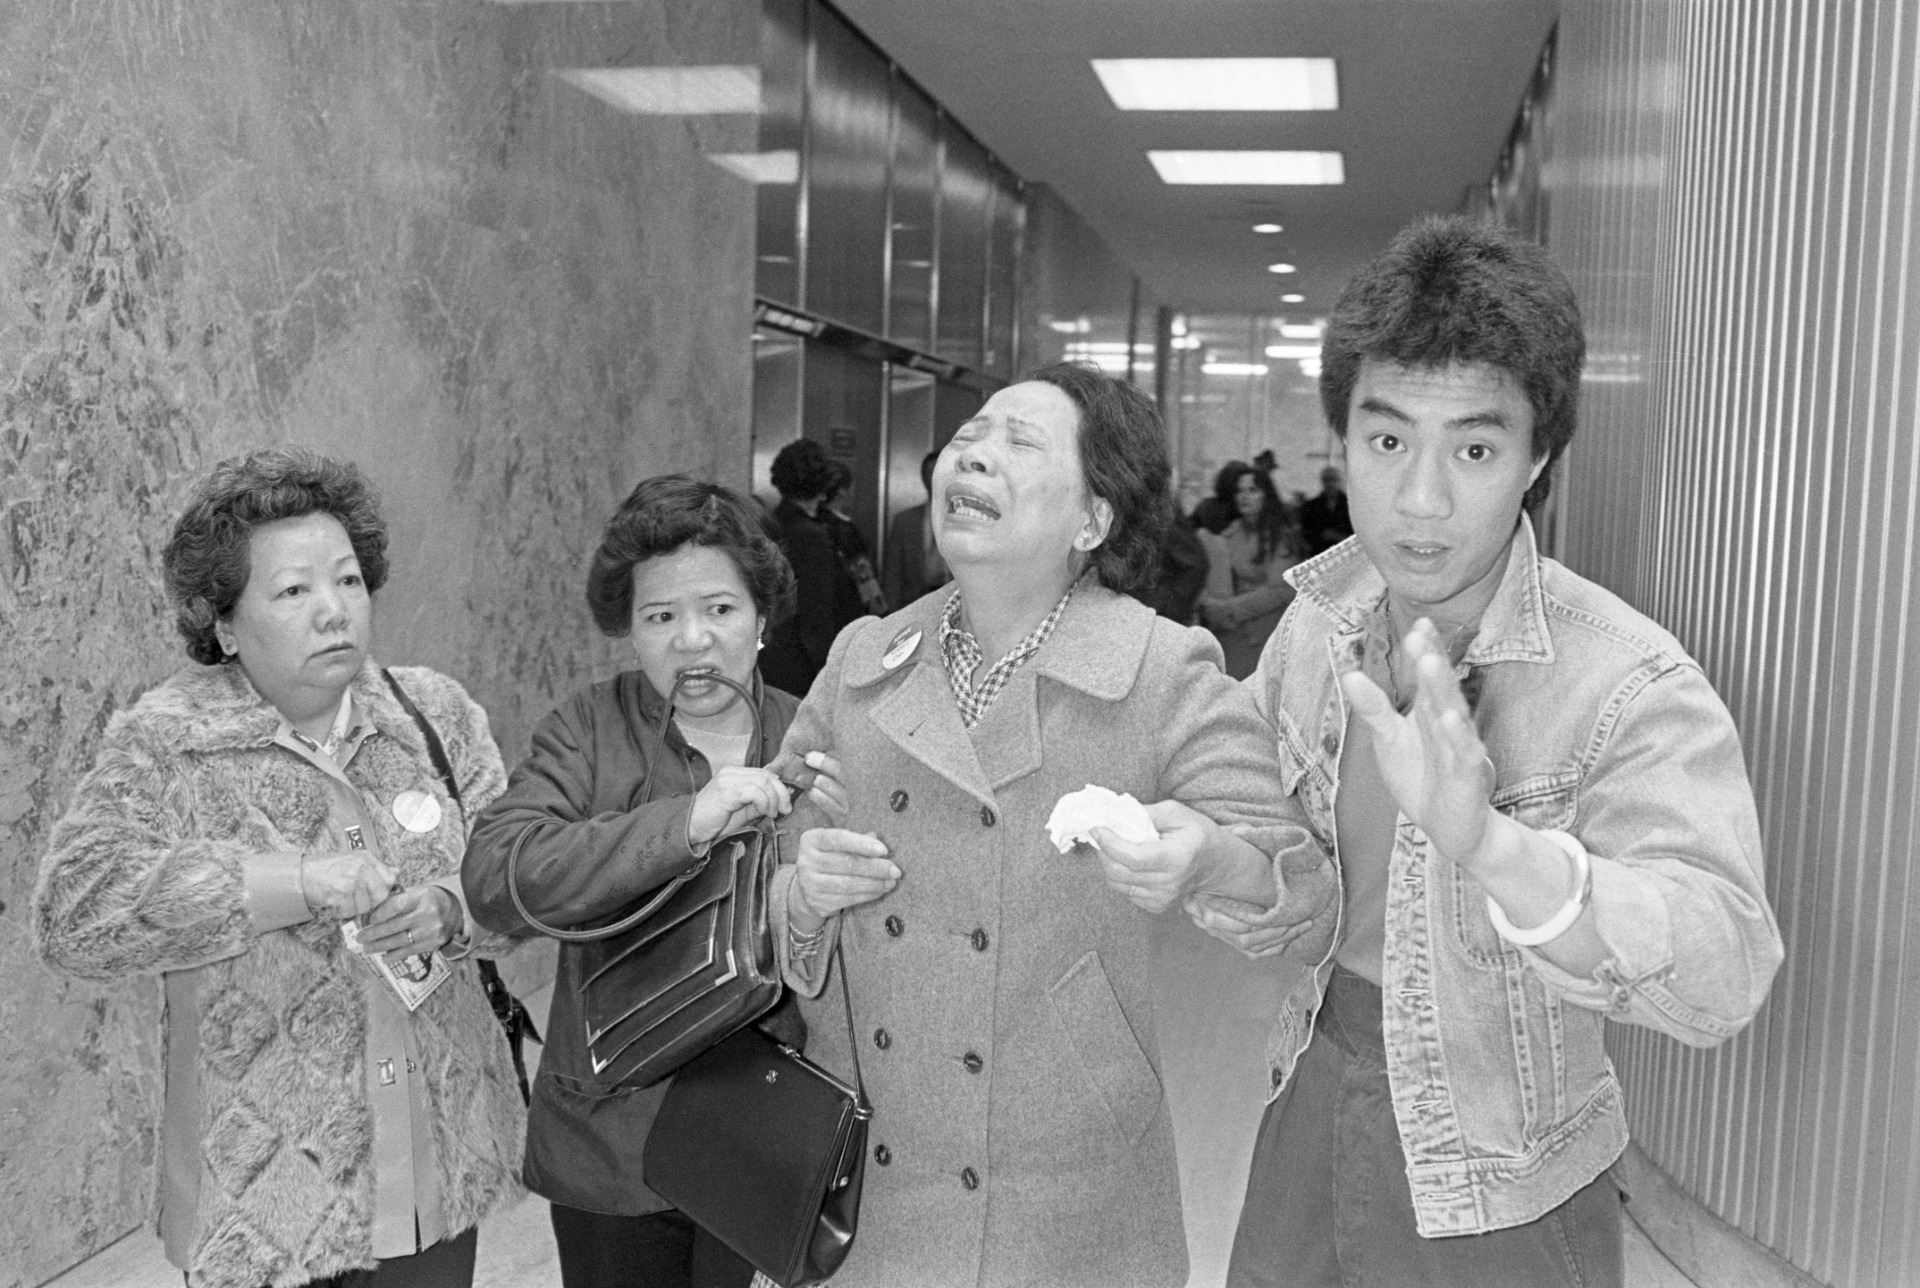 Three women, left, and one man, right, walk down a hallway in a black and white photo. A woman third form left is crying in anguish, as the woman amd man to her immediate sides carry her by the arms.